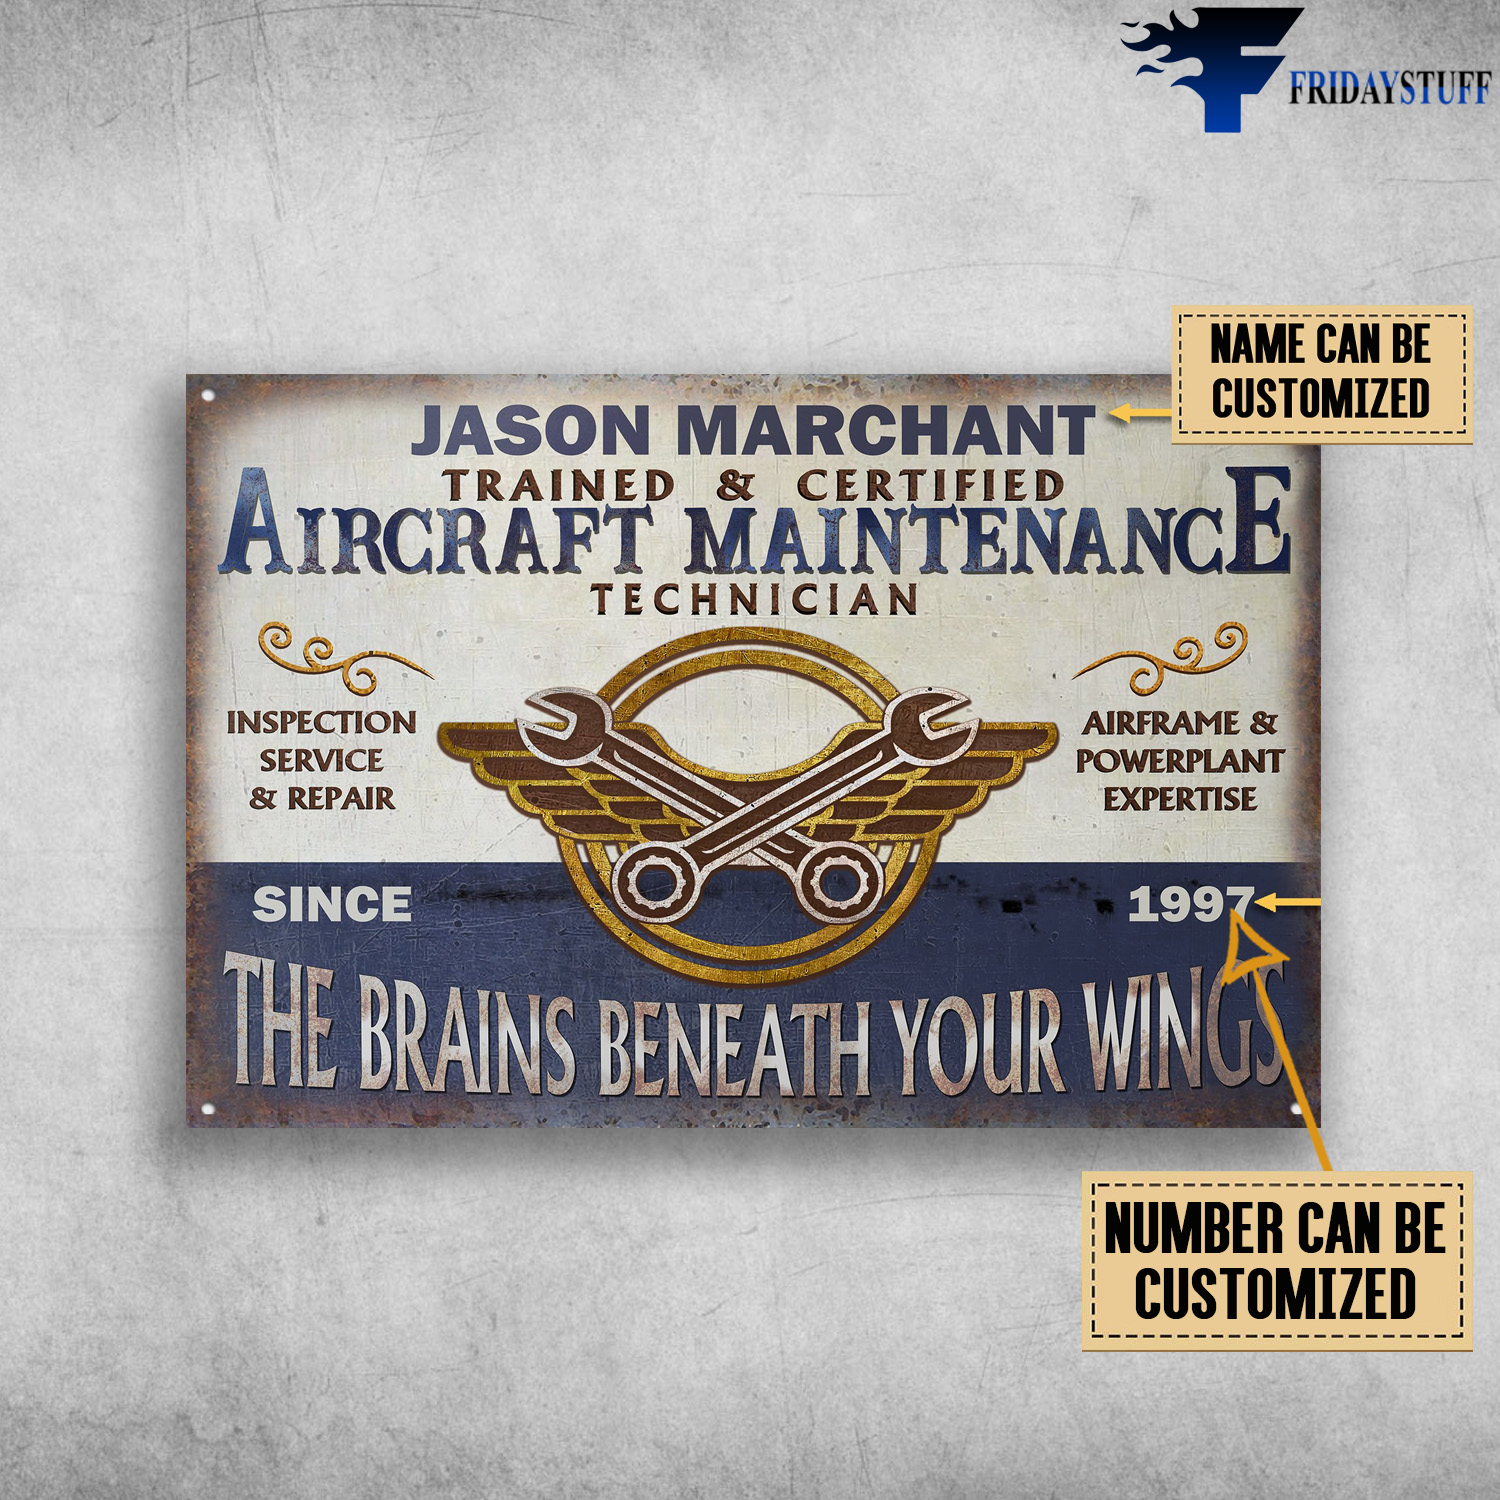 Aircraft Maintenance Vintage Trained, Jason Marchant, Trained And Certified, Aircraft Maintenance Technician, Inspection Service And Repair, Airframe And Powerplant Expertise, The Brains Beneath Your Wings